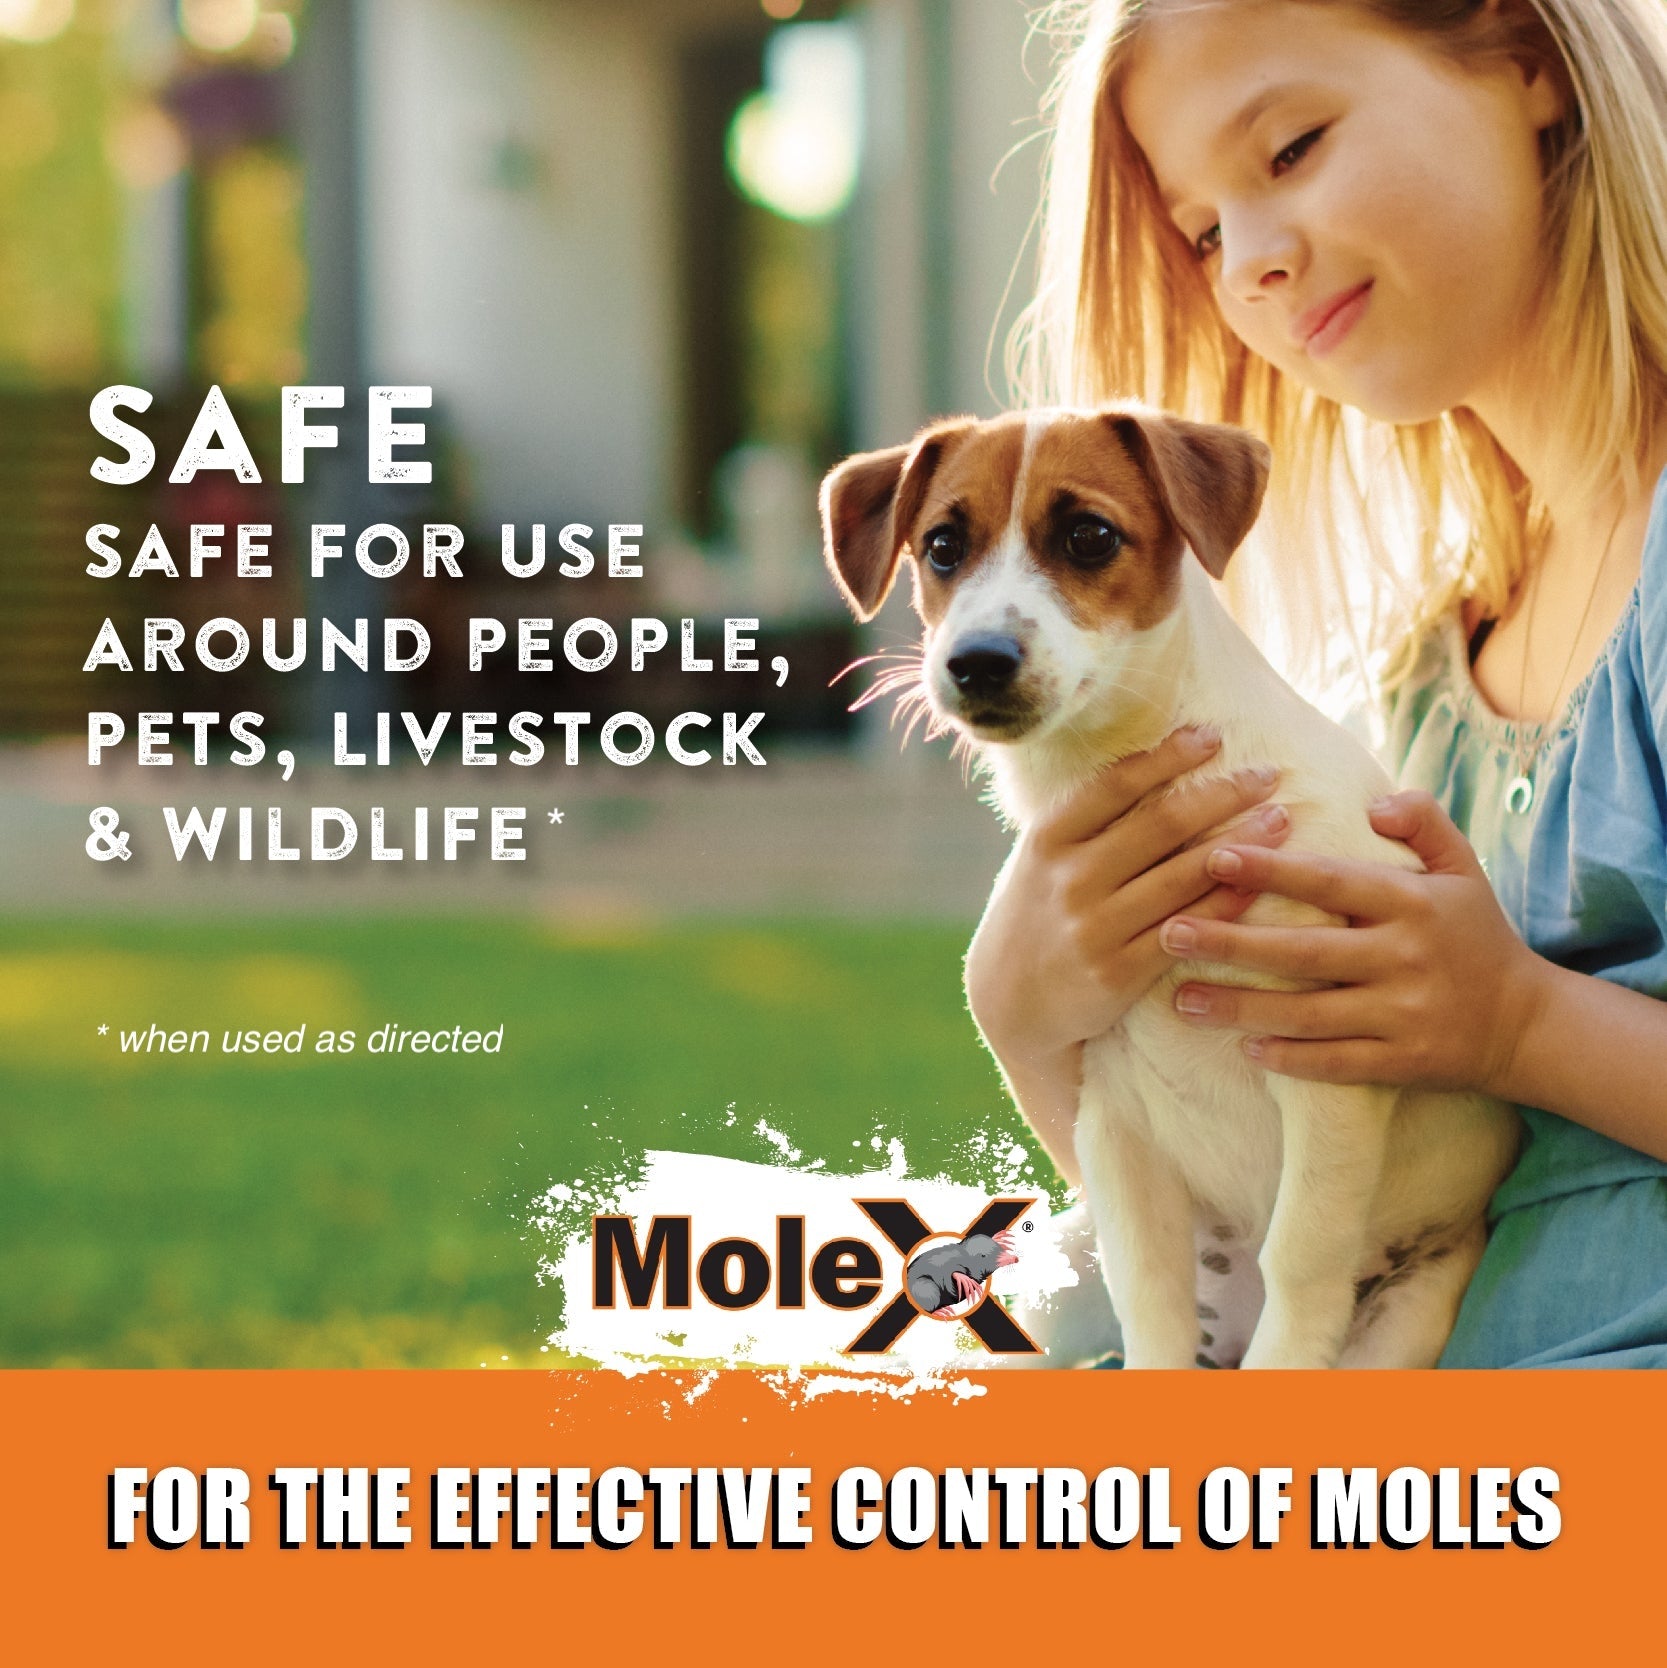 molex safe for use around people and pets